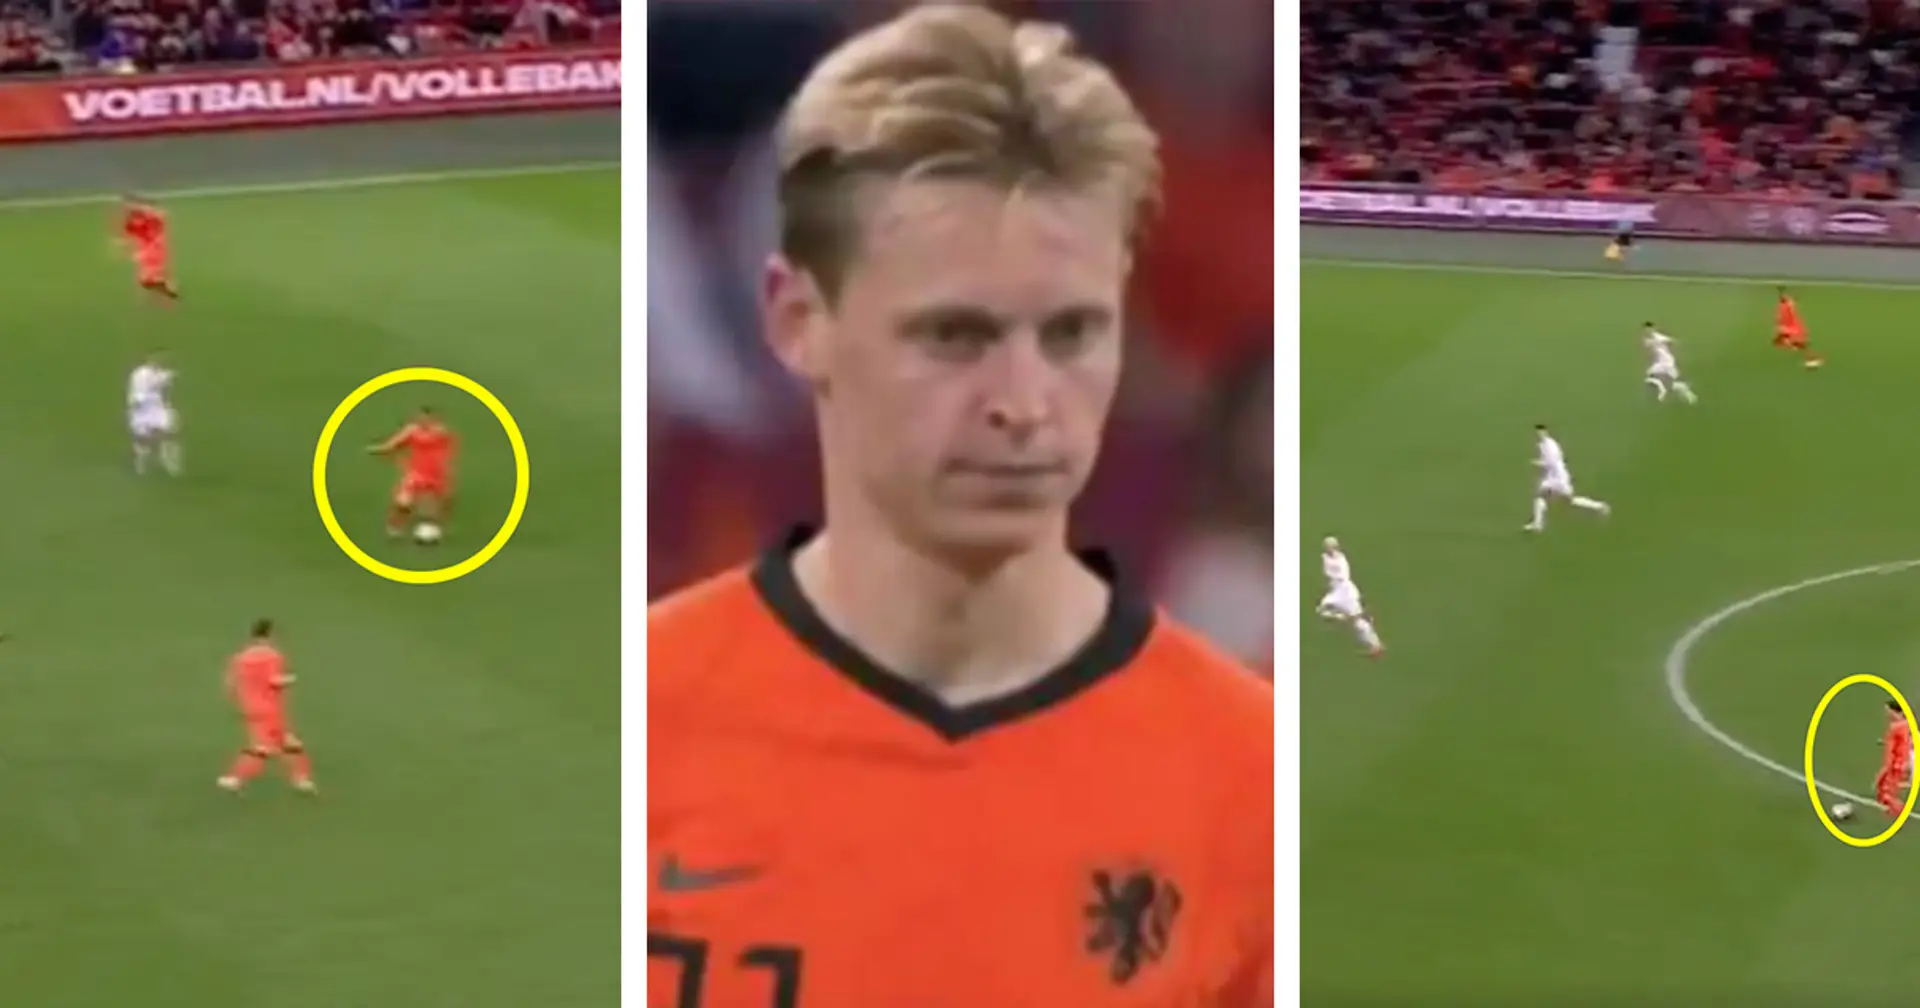 Frenkie de Jong assists for the Netherlands, shows one thing he's especially great at